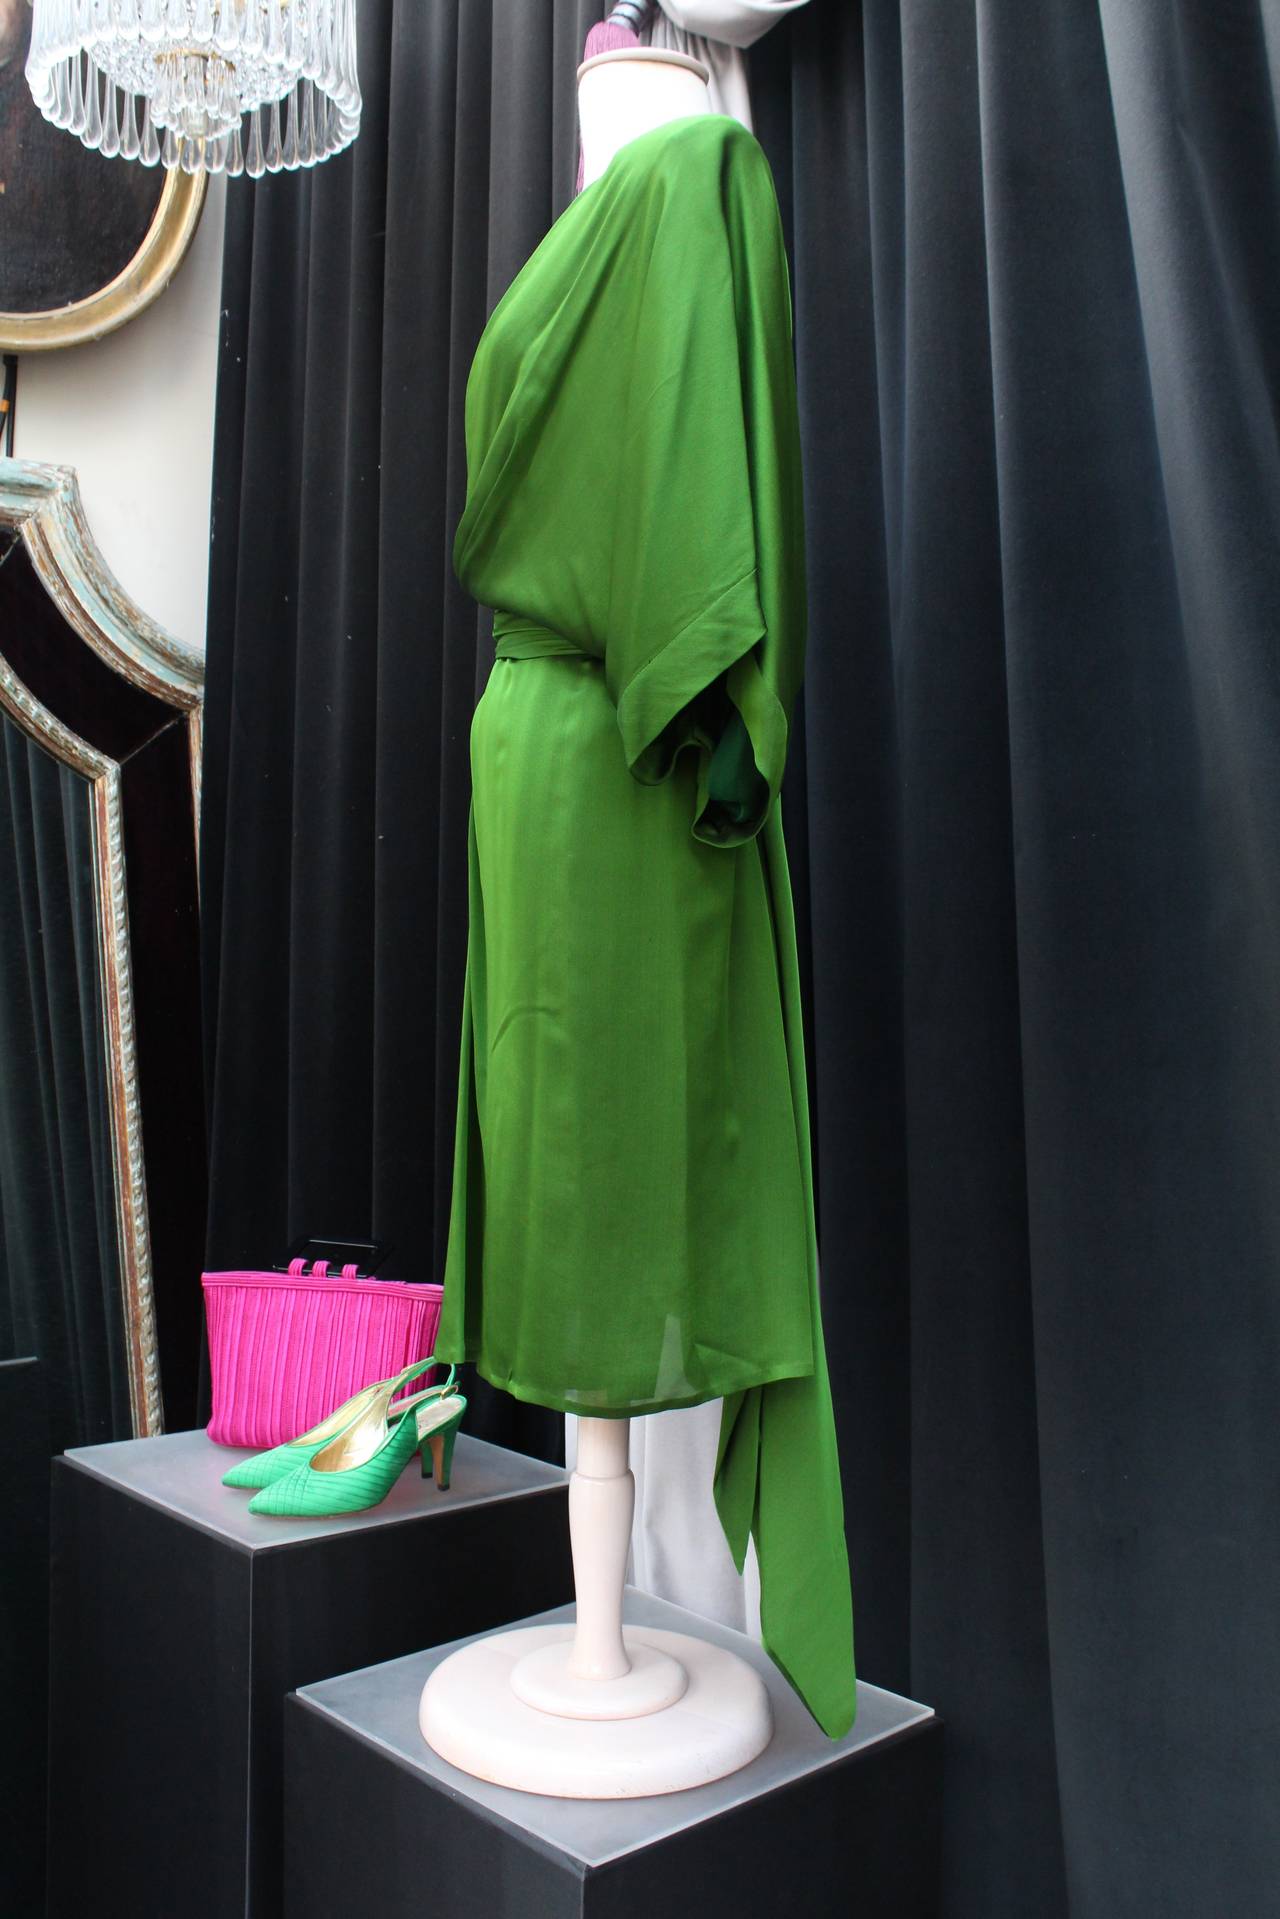 Exquisite knee-length asymmetrical dress by Yves Saint Laurent from his Haute Couture 1990-91 collection, composed of draped emerald green silk. 
The dress features one long sleeve, and one batwing sleeve, as well as a silk belt to be tied around